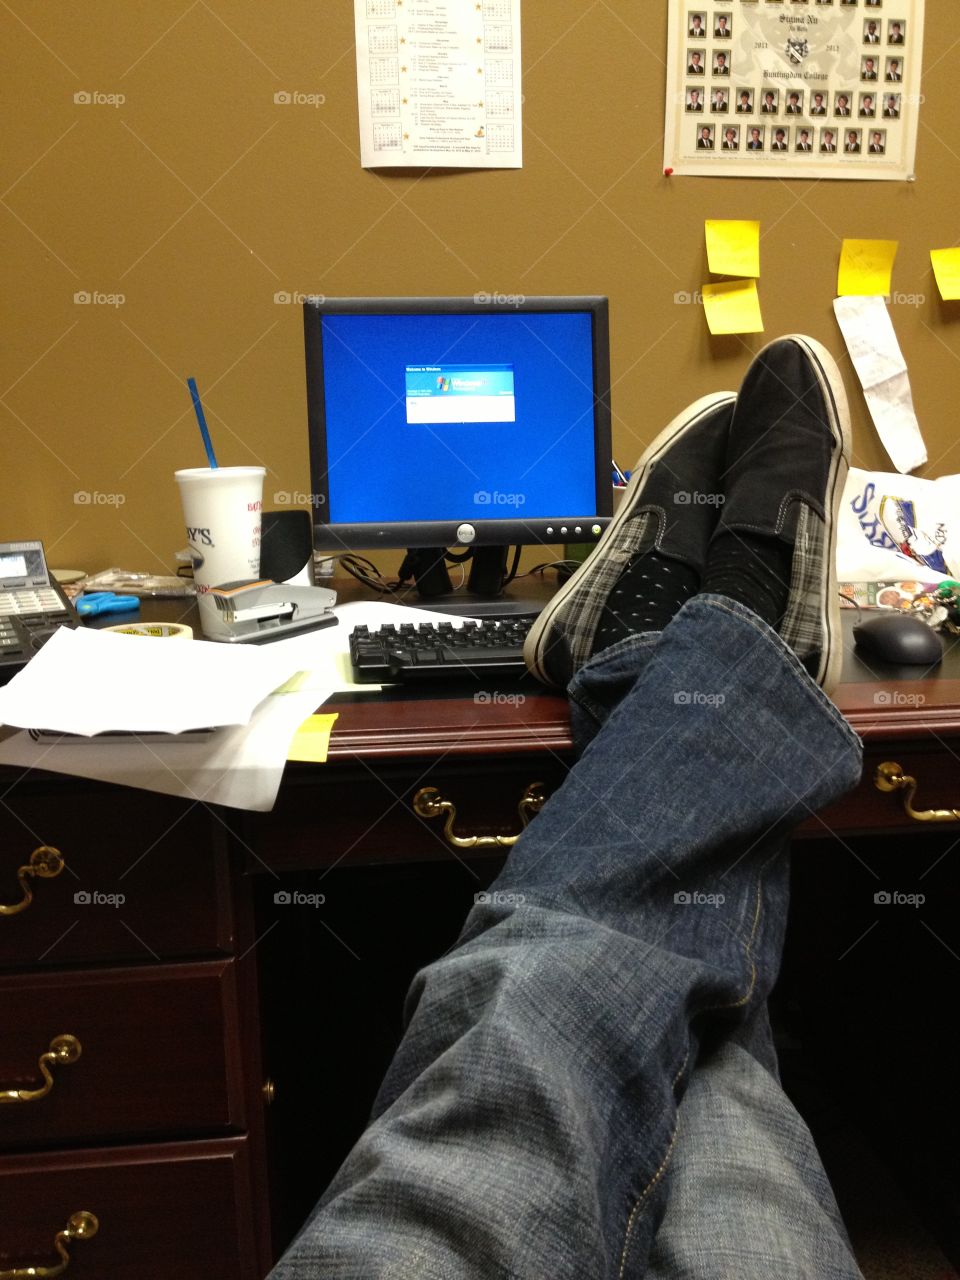 Work Hard Play Hard. Taking a minute to relax at work.